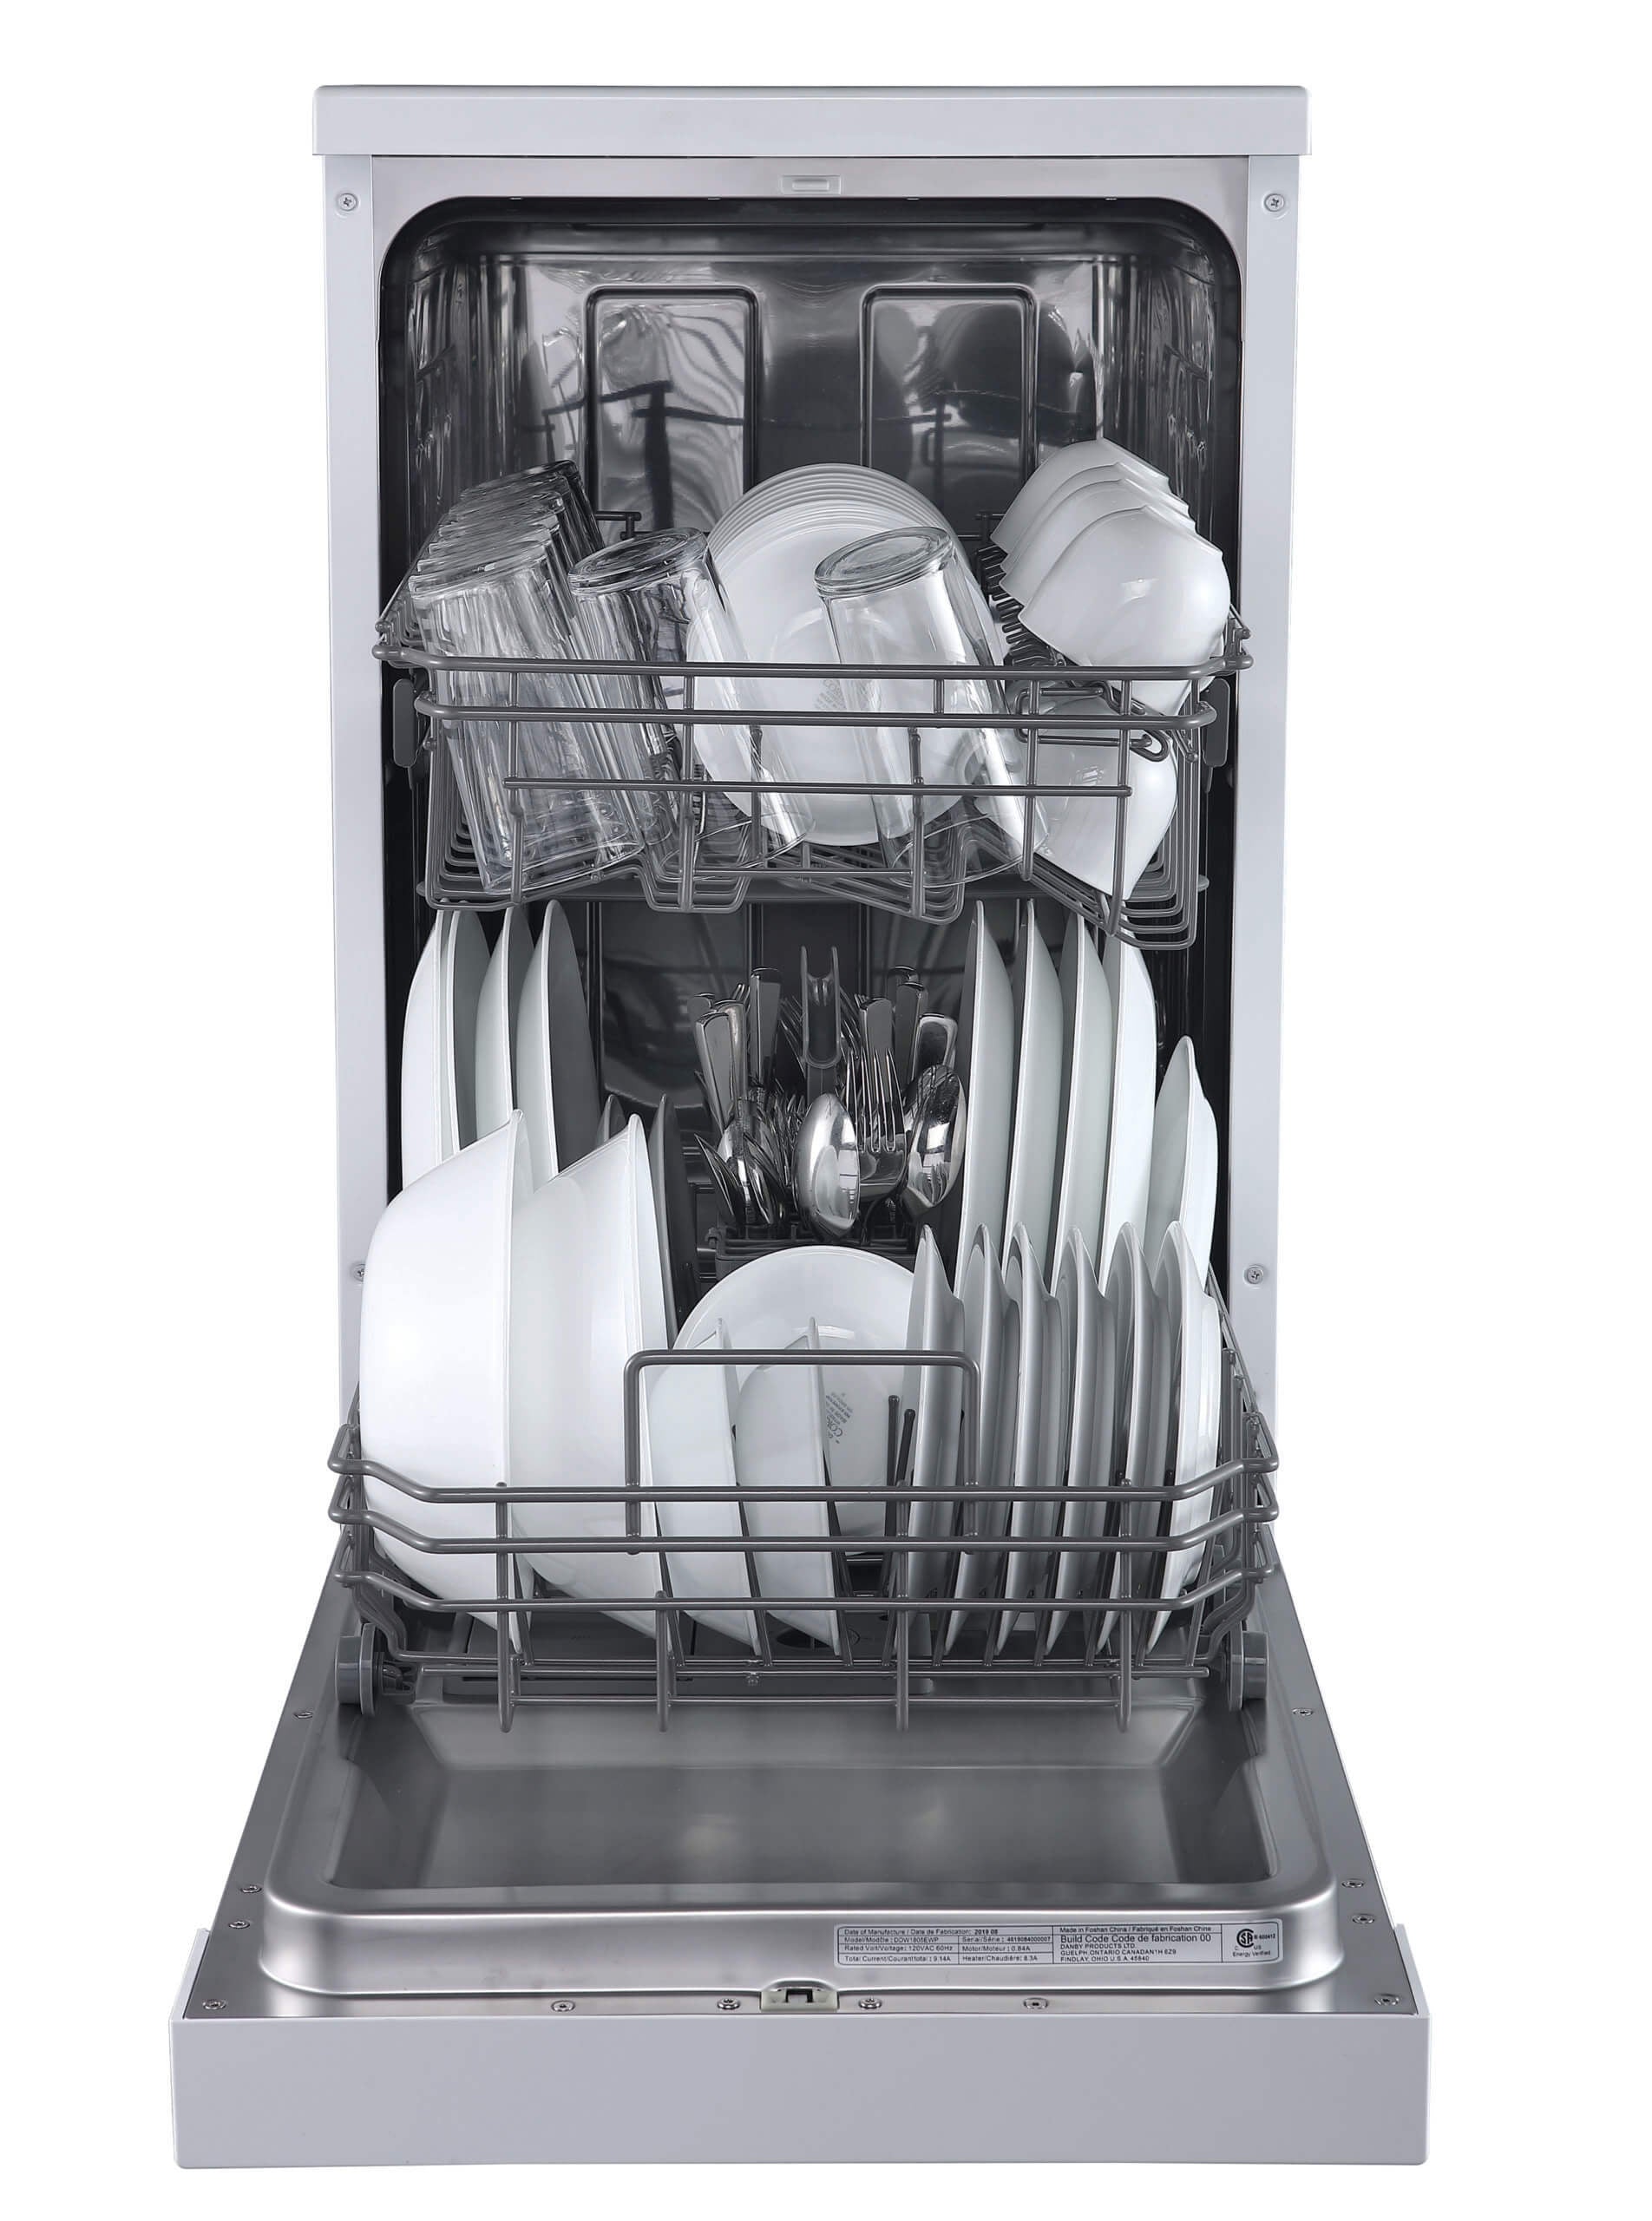 Danby 18 Wide Built-in Dishwasher in White